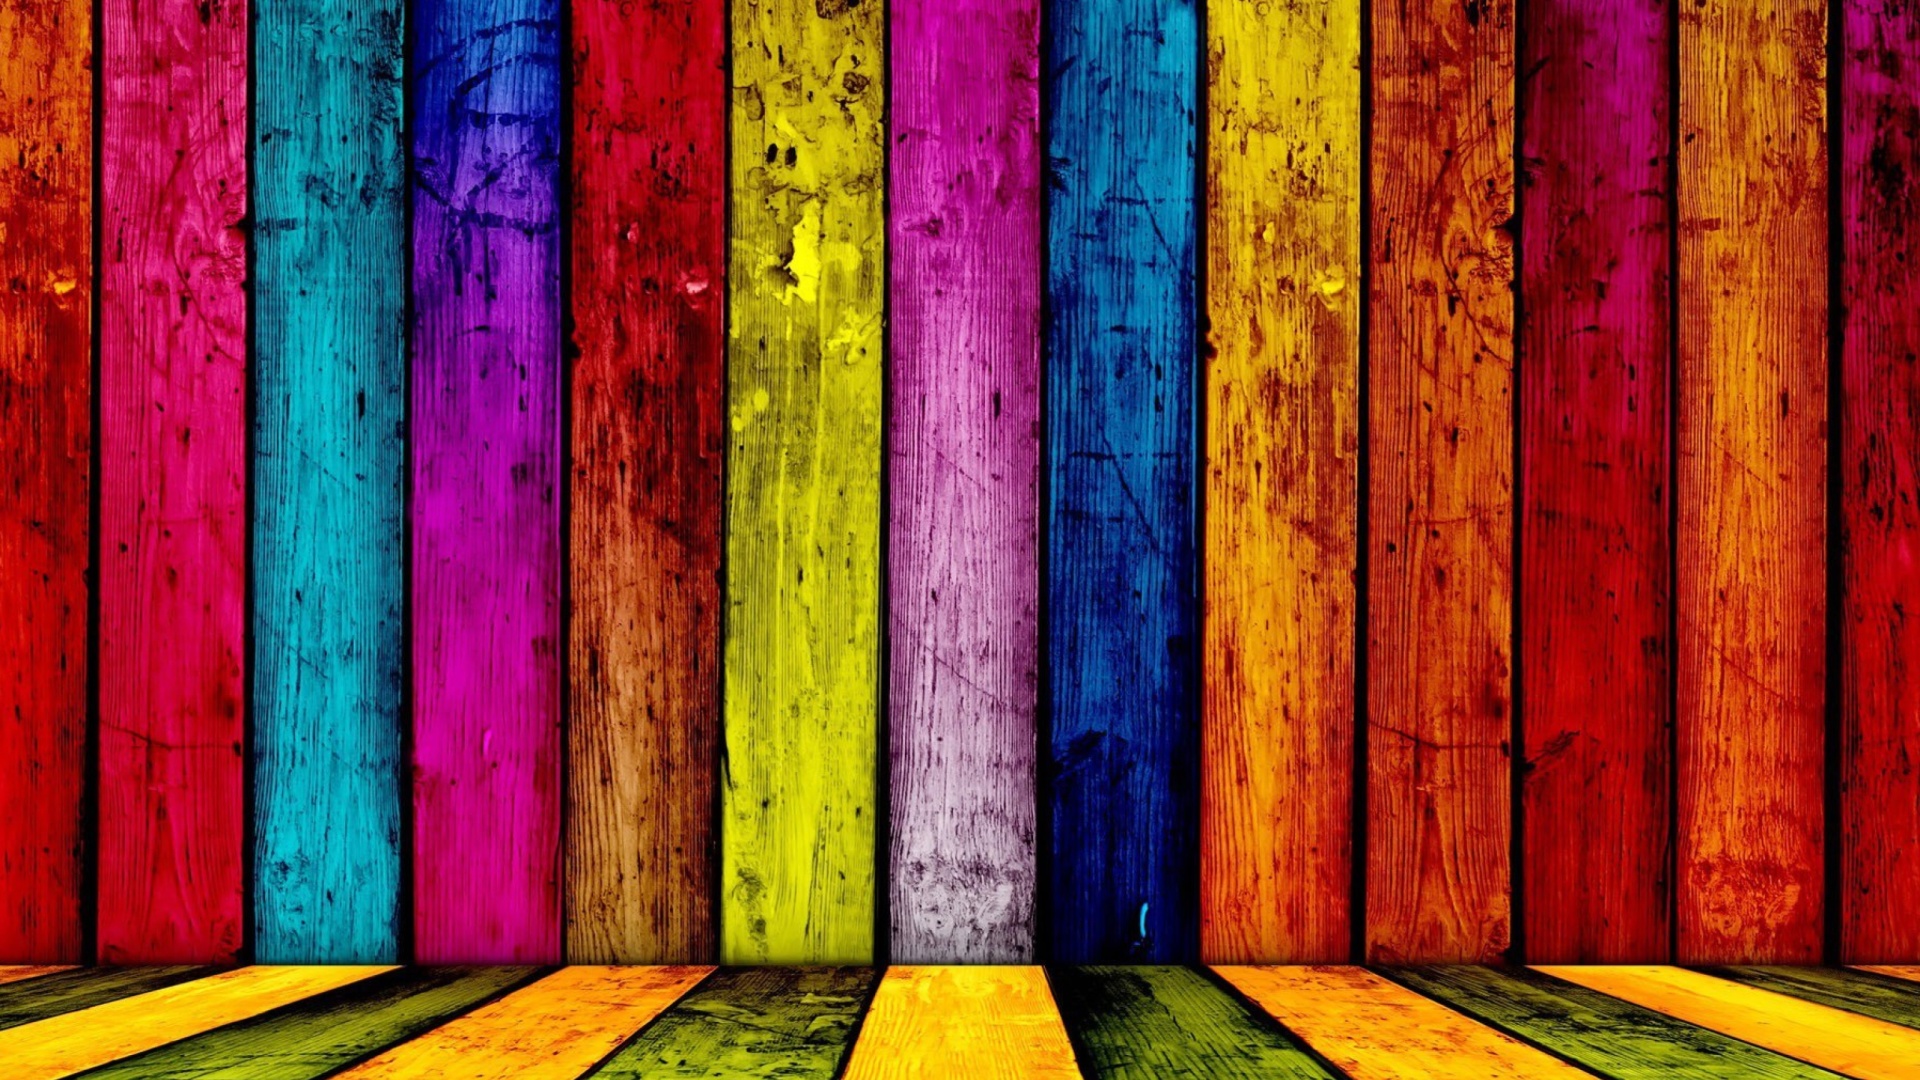 Colorful Backgrounds, Amazing Design wallpaper 1920x1080